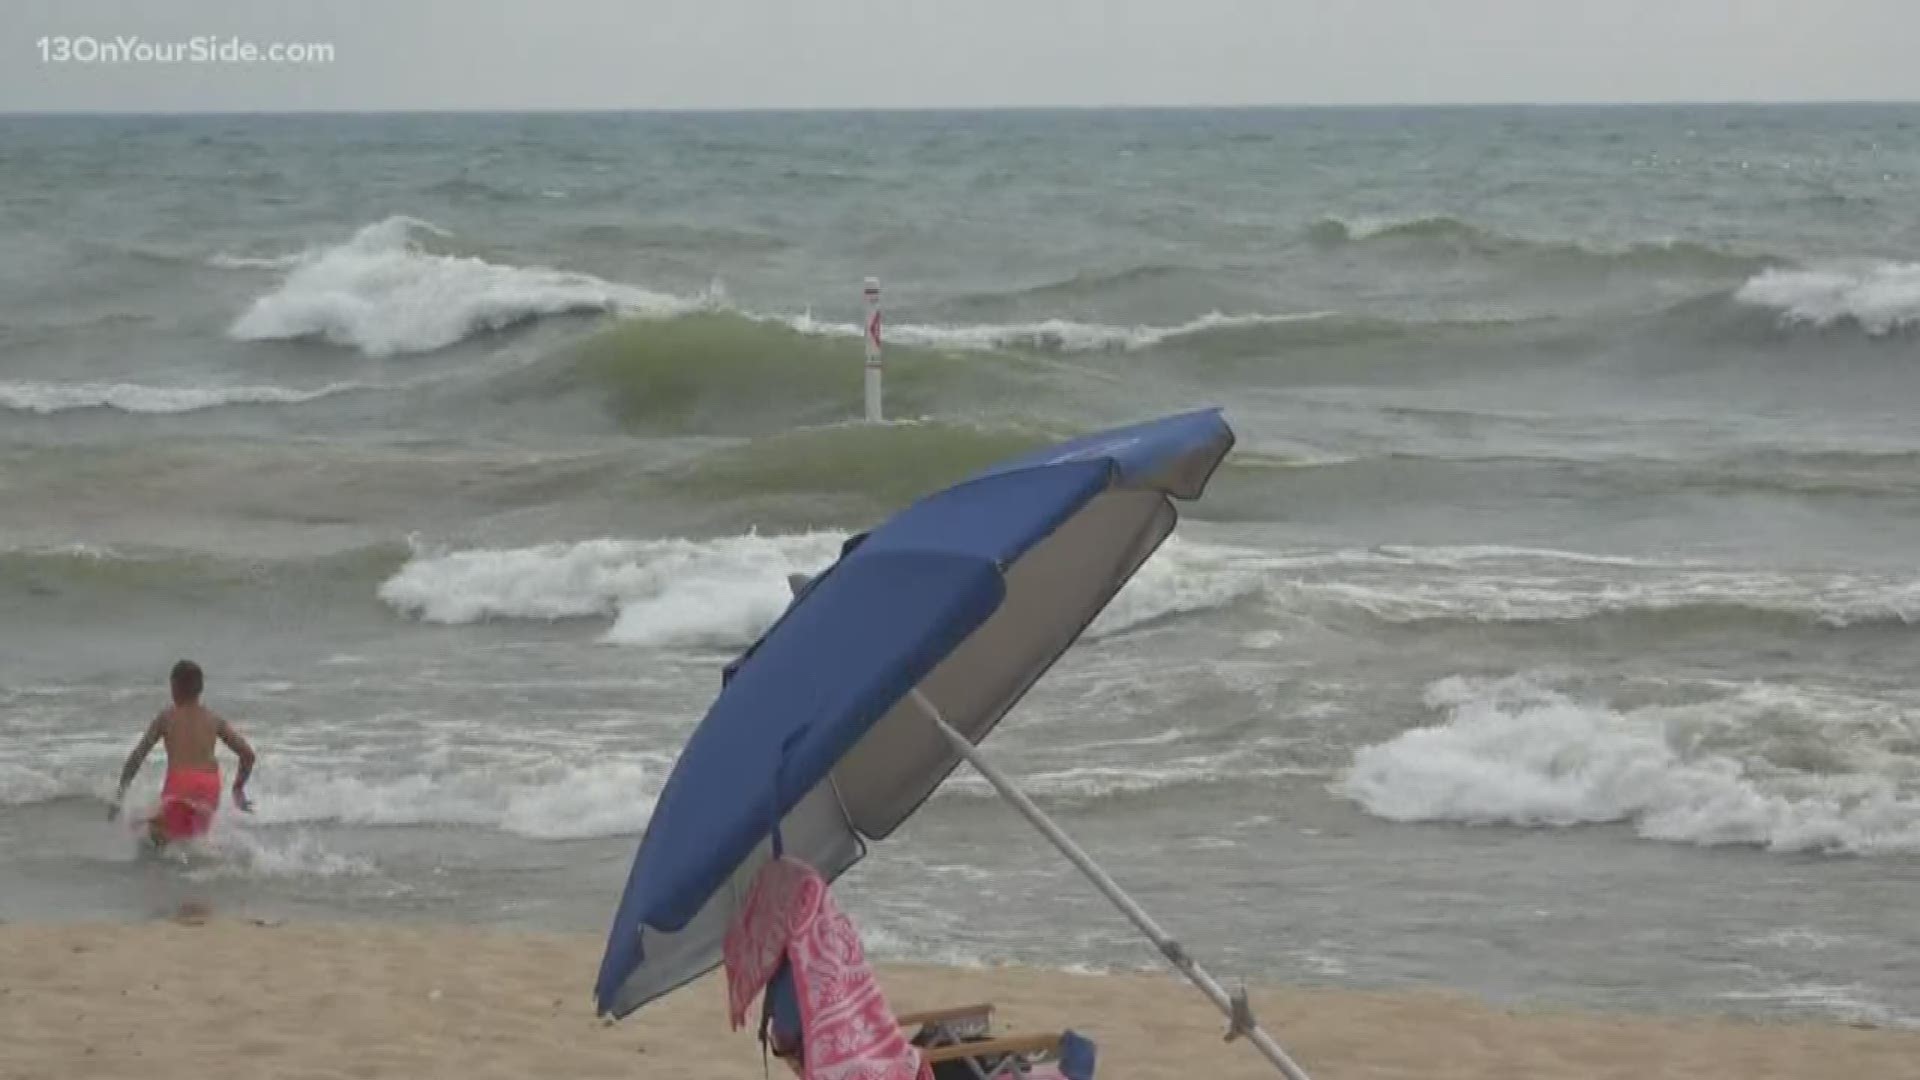 Planning to go to a Lake Michigan beach Monday? The National Weather Service says bathers should think about another day.